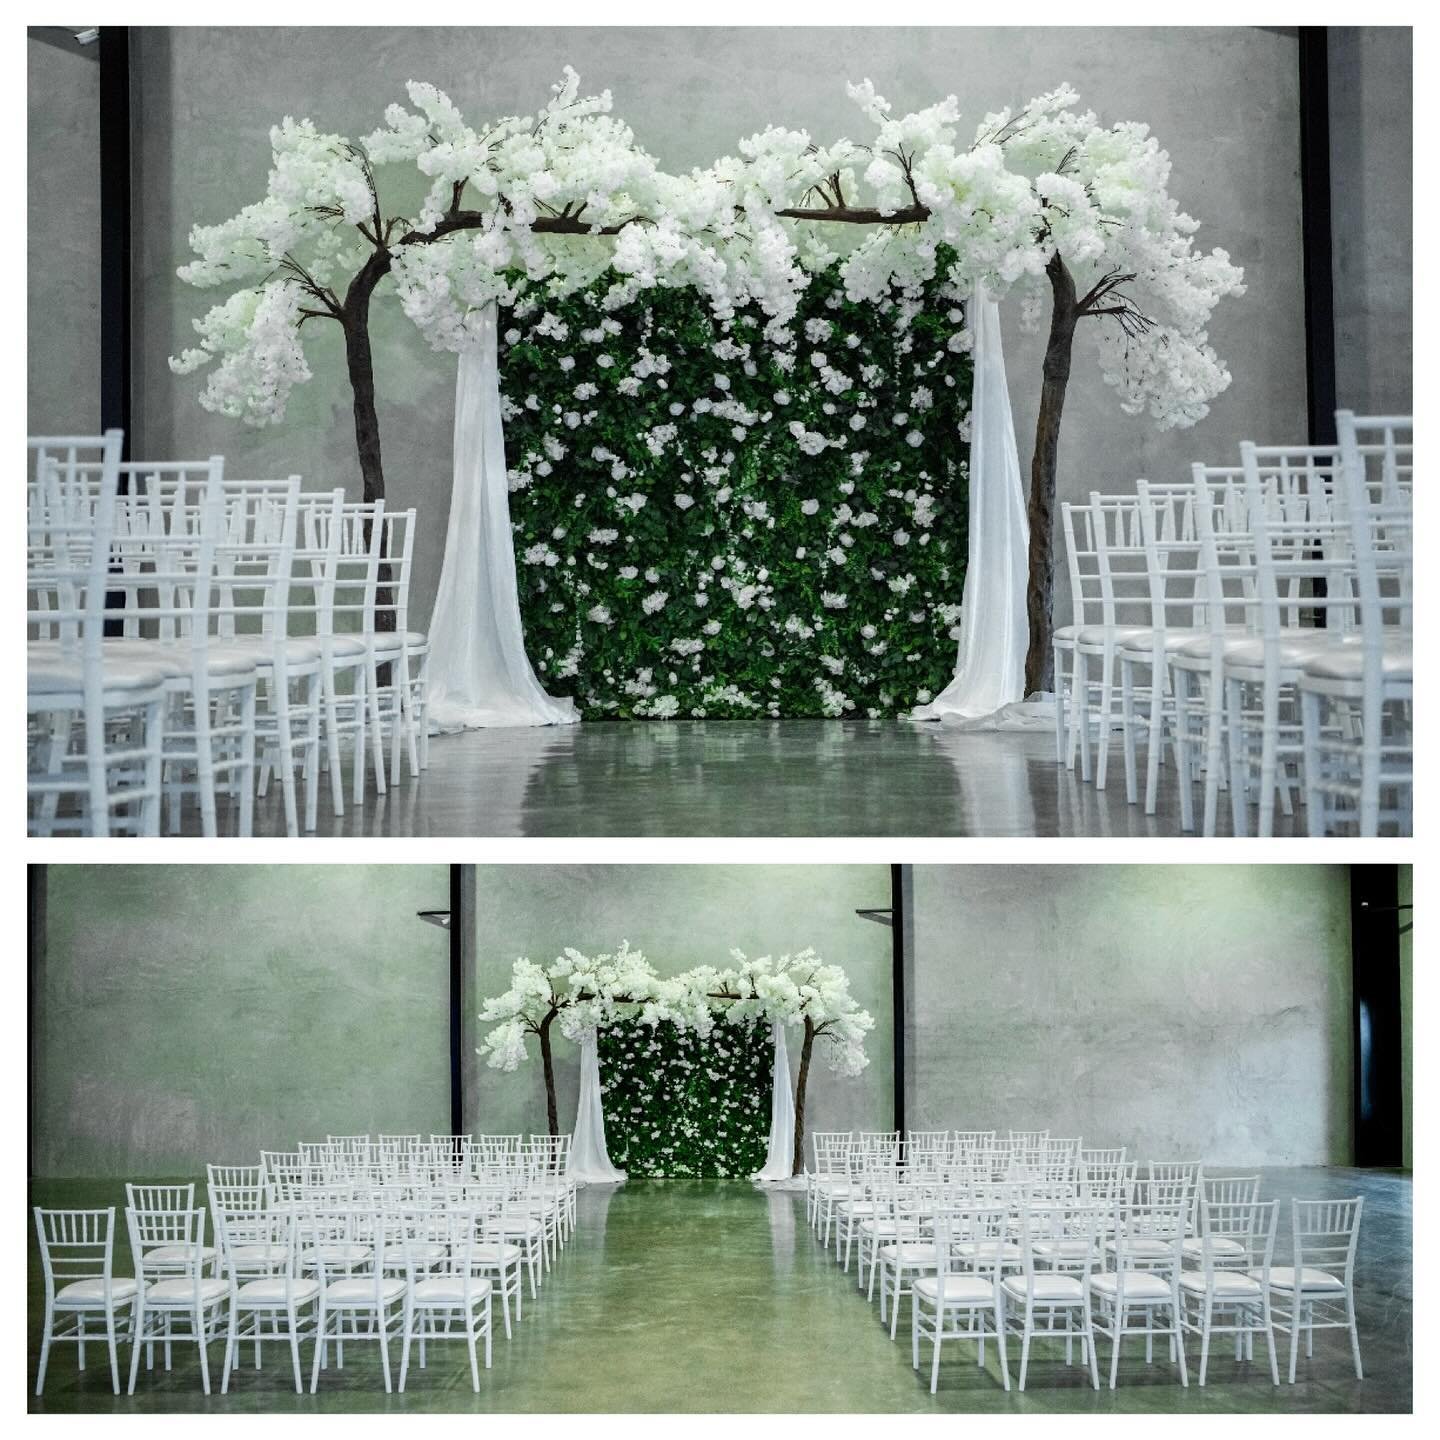 Ceremony setup at White Rock Canyon with our White Chiavari Chairs, Garden Flower Wall, &amp; two 10 ft. Arching Cherry Blossom Trees. &mdash;&mdash;&mdash;&mdash;&mdash;&mdash;&mdash;&mdash;&mdash;&mdash;&mdash;&mdash;&mdash;&mdash;&mdash;&mdash;&md